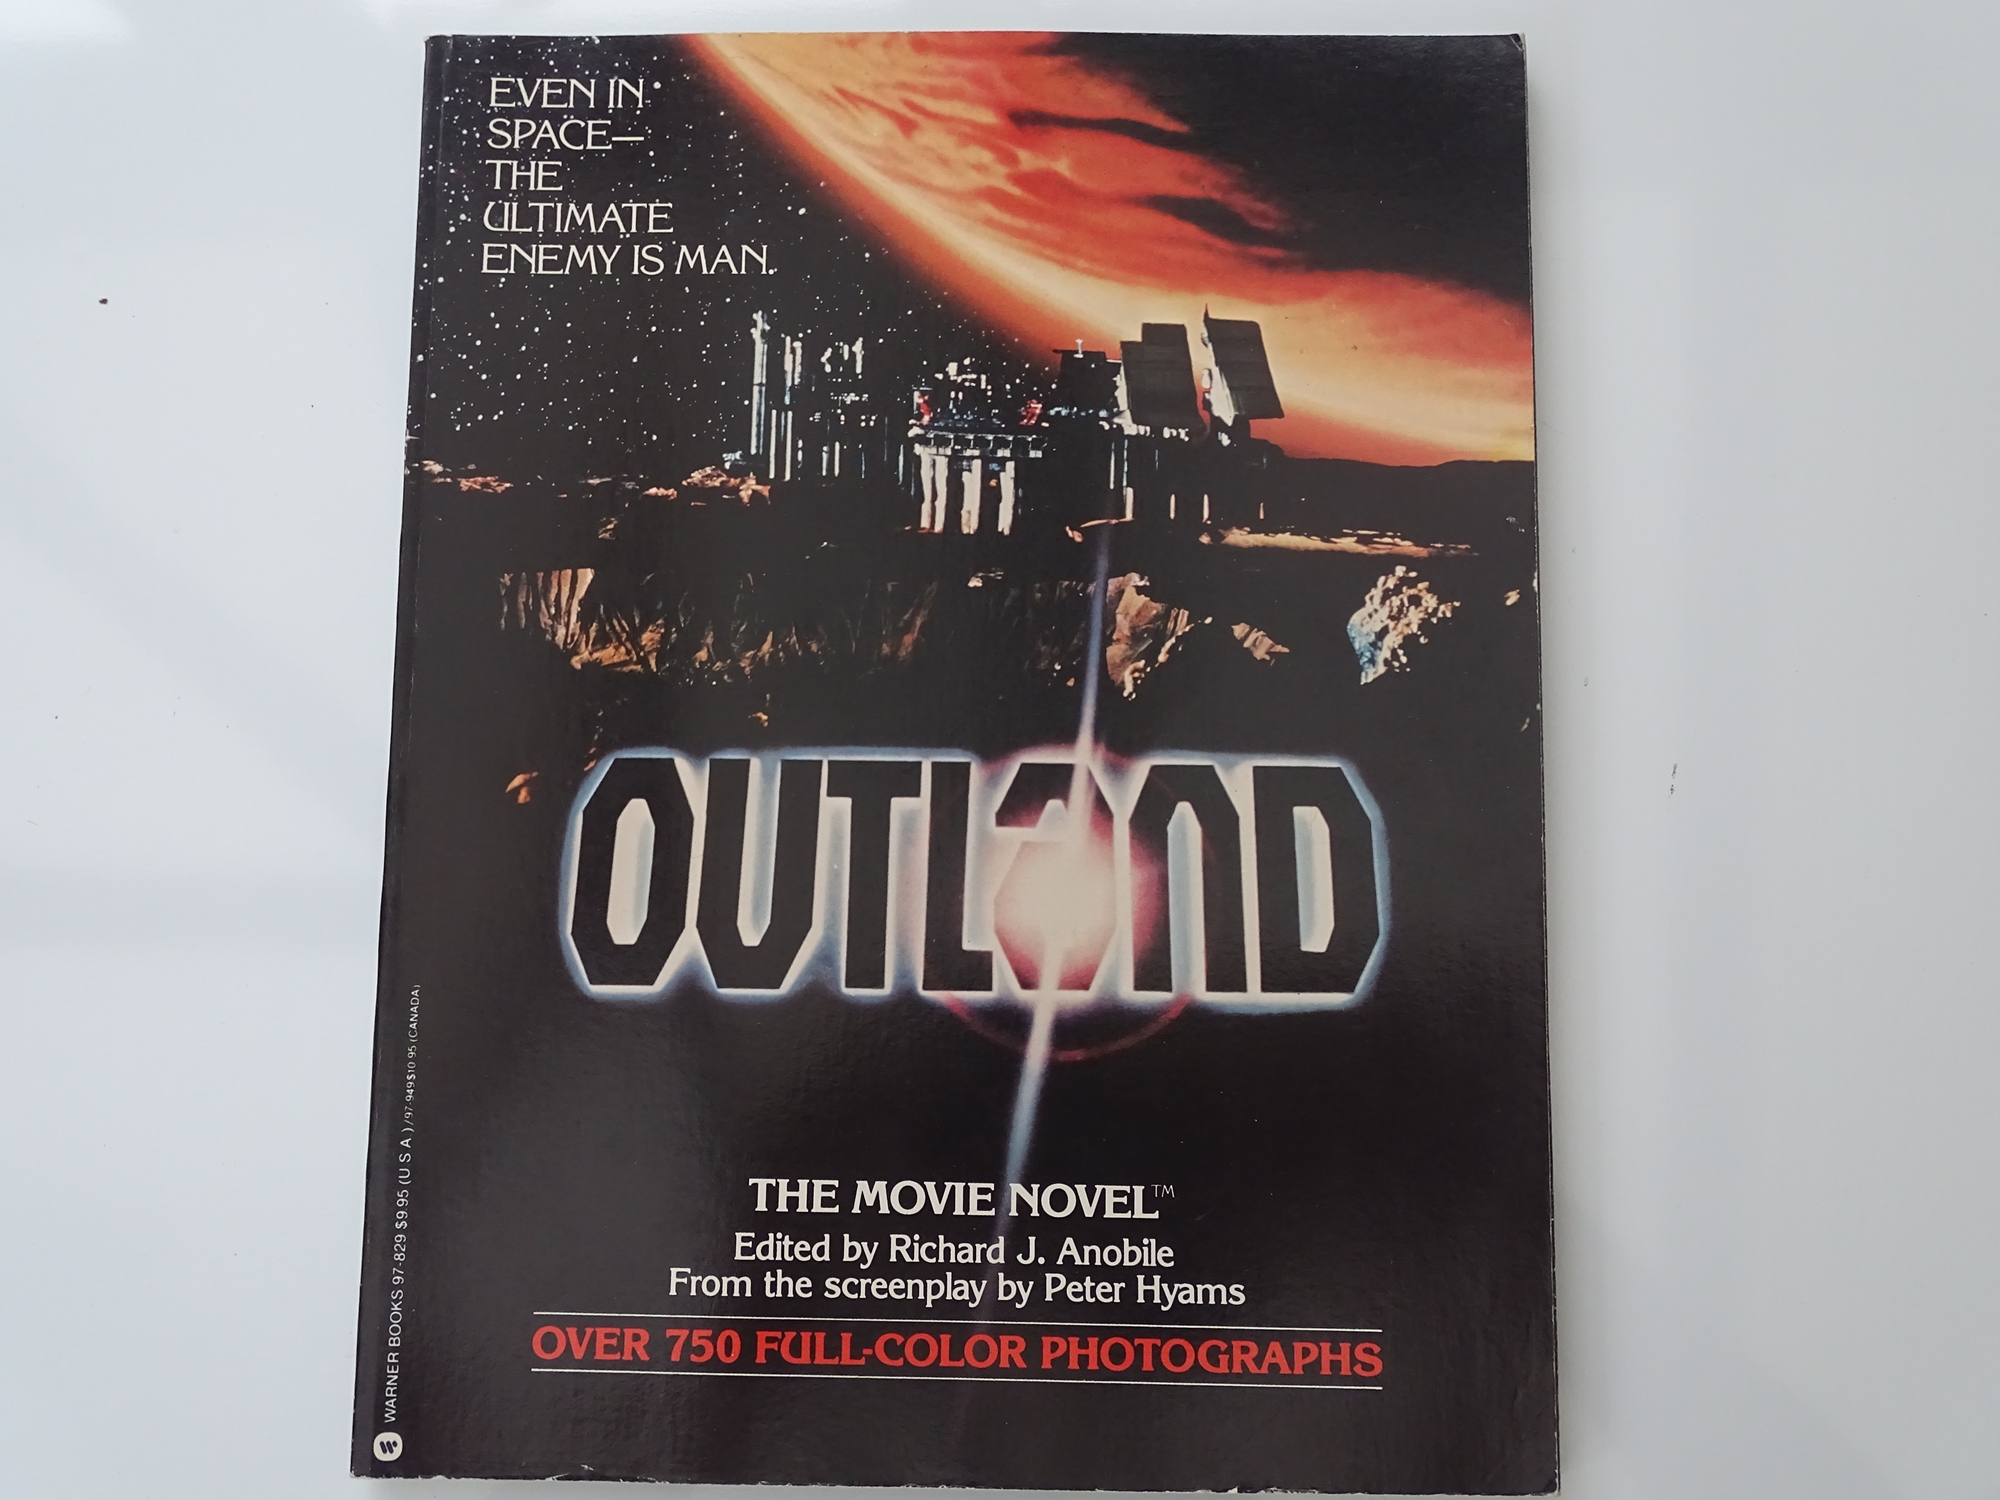 OUTLAND (1981) - 'The Movie Novel' and US Oversized Lobby Cards for the PETER HYAMS 'Space